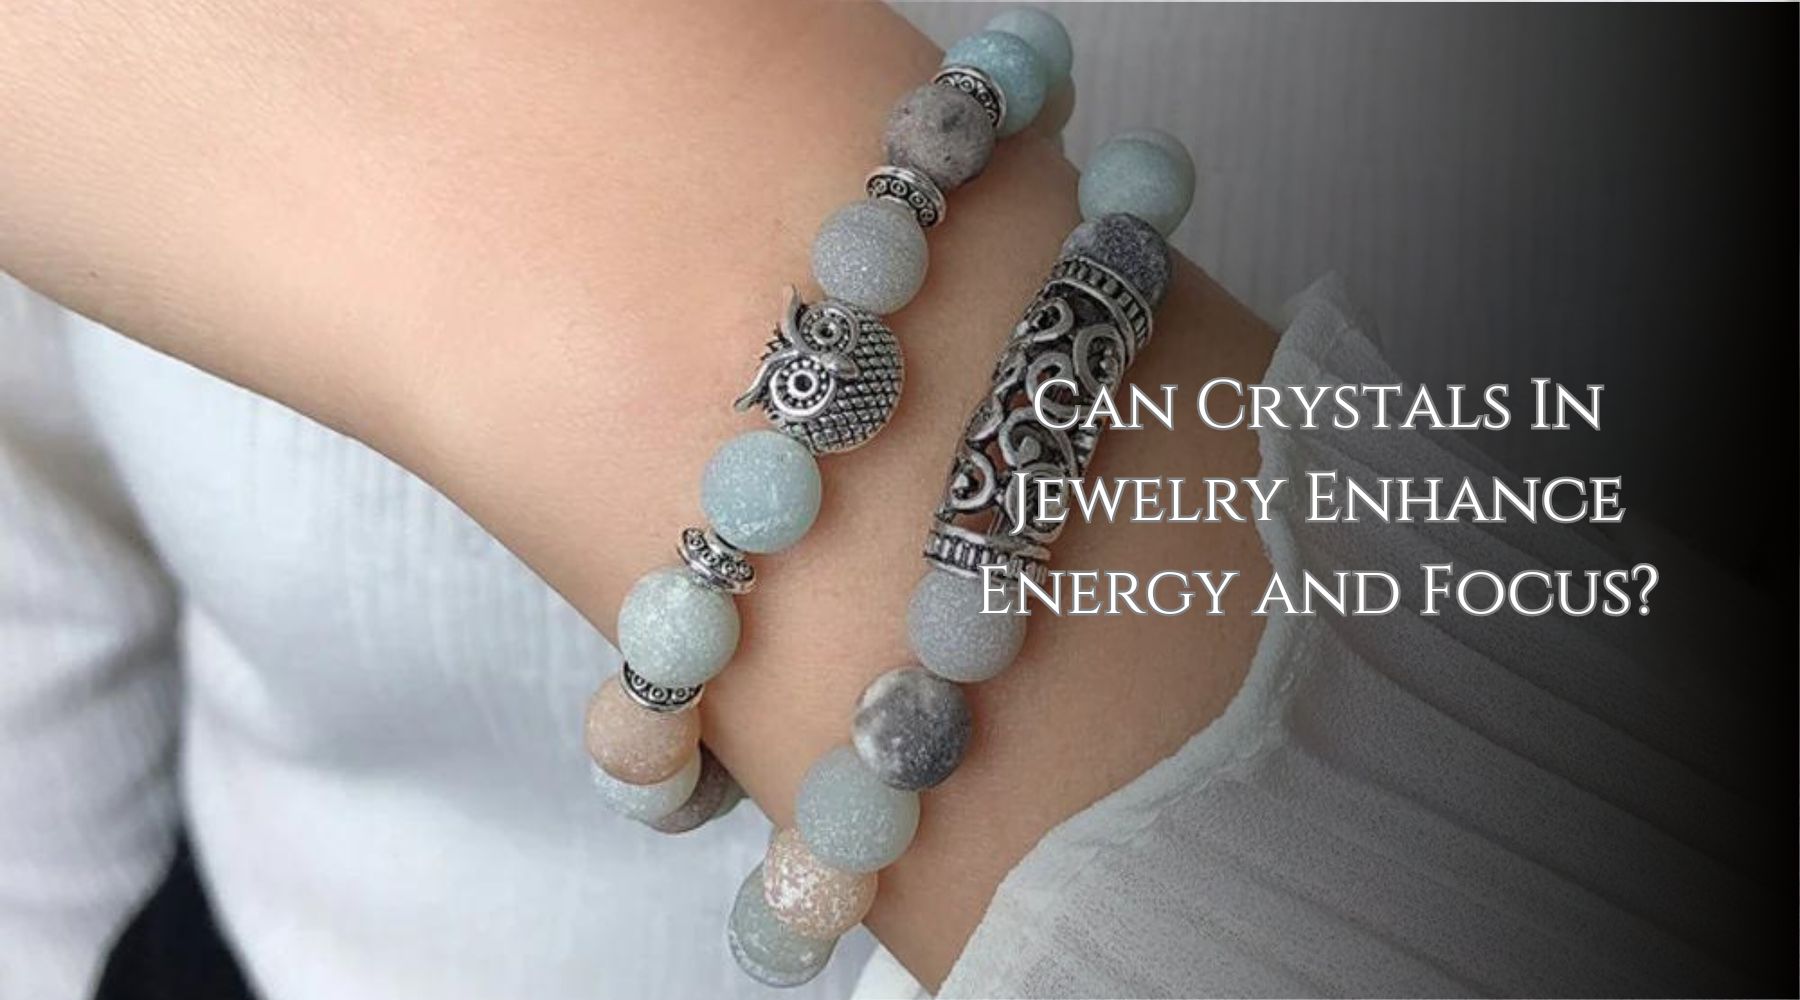 Can Crystals In Jewelry Enhance Energy and Focus?